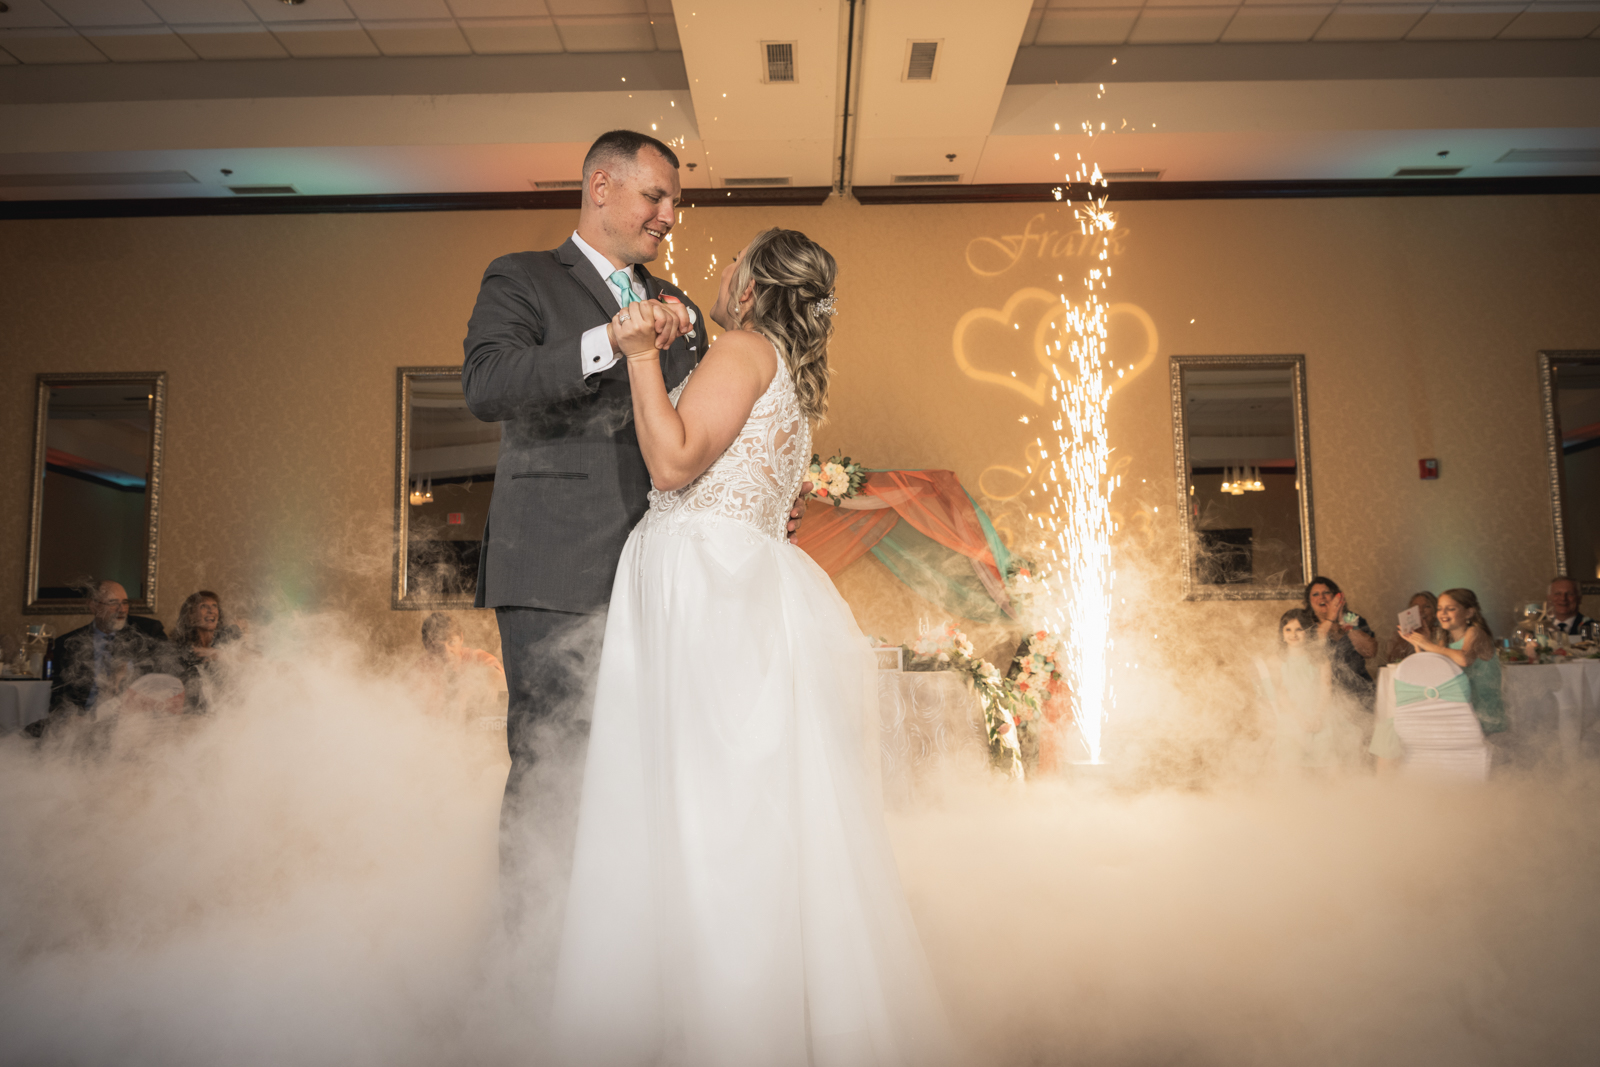 Love, Laughter, and Dancing in the Clouds: Frank and Jamie Drahan’s Unforgettable Wedding at The Bertram Inn